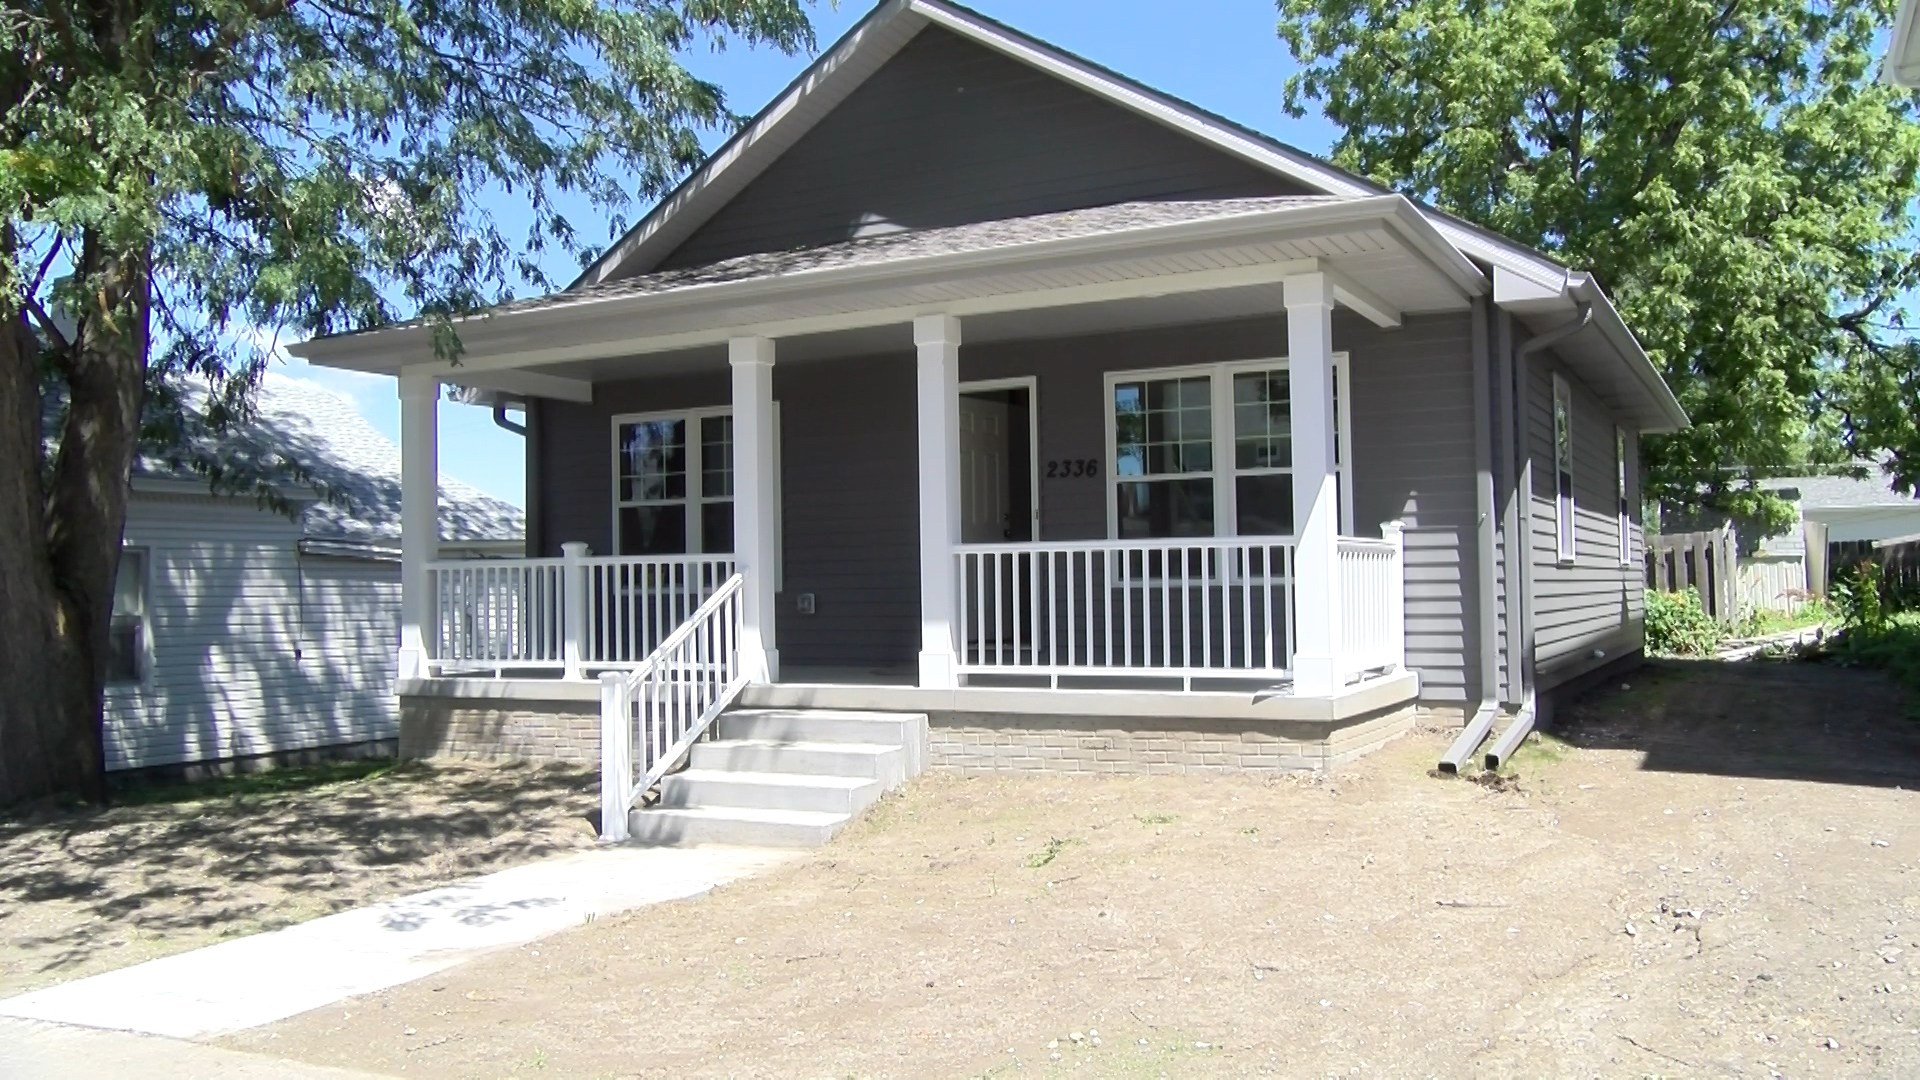 NeighborWorks celebrates first community build home project